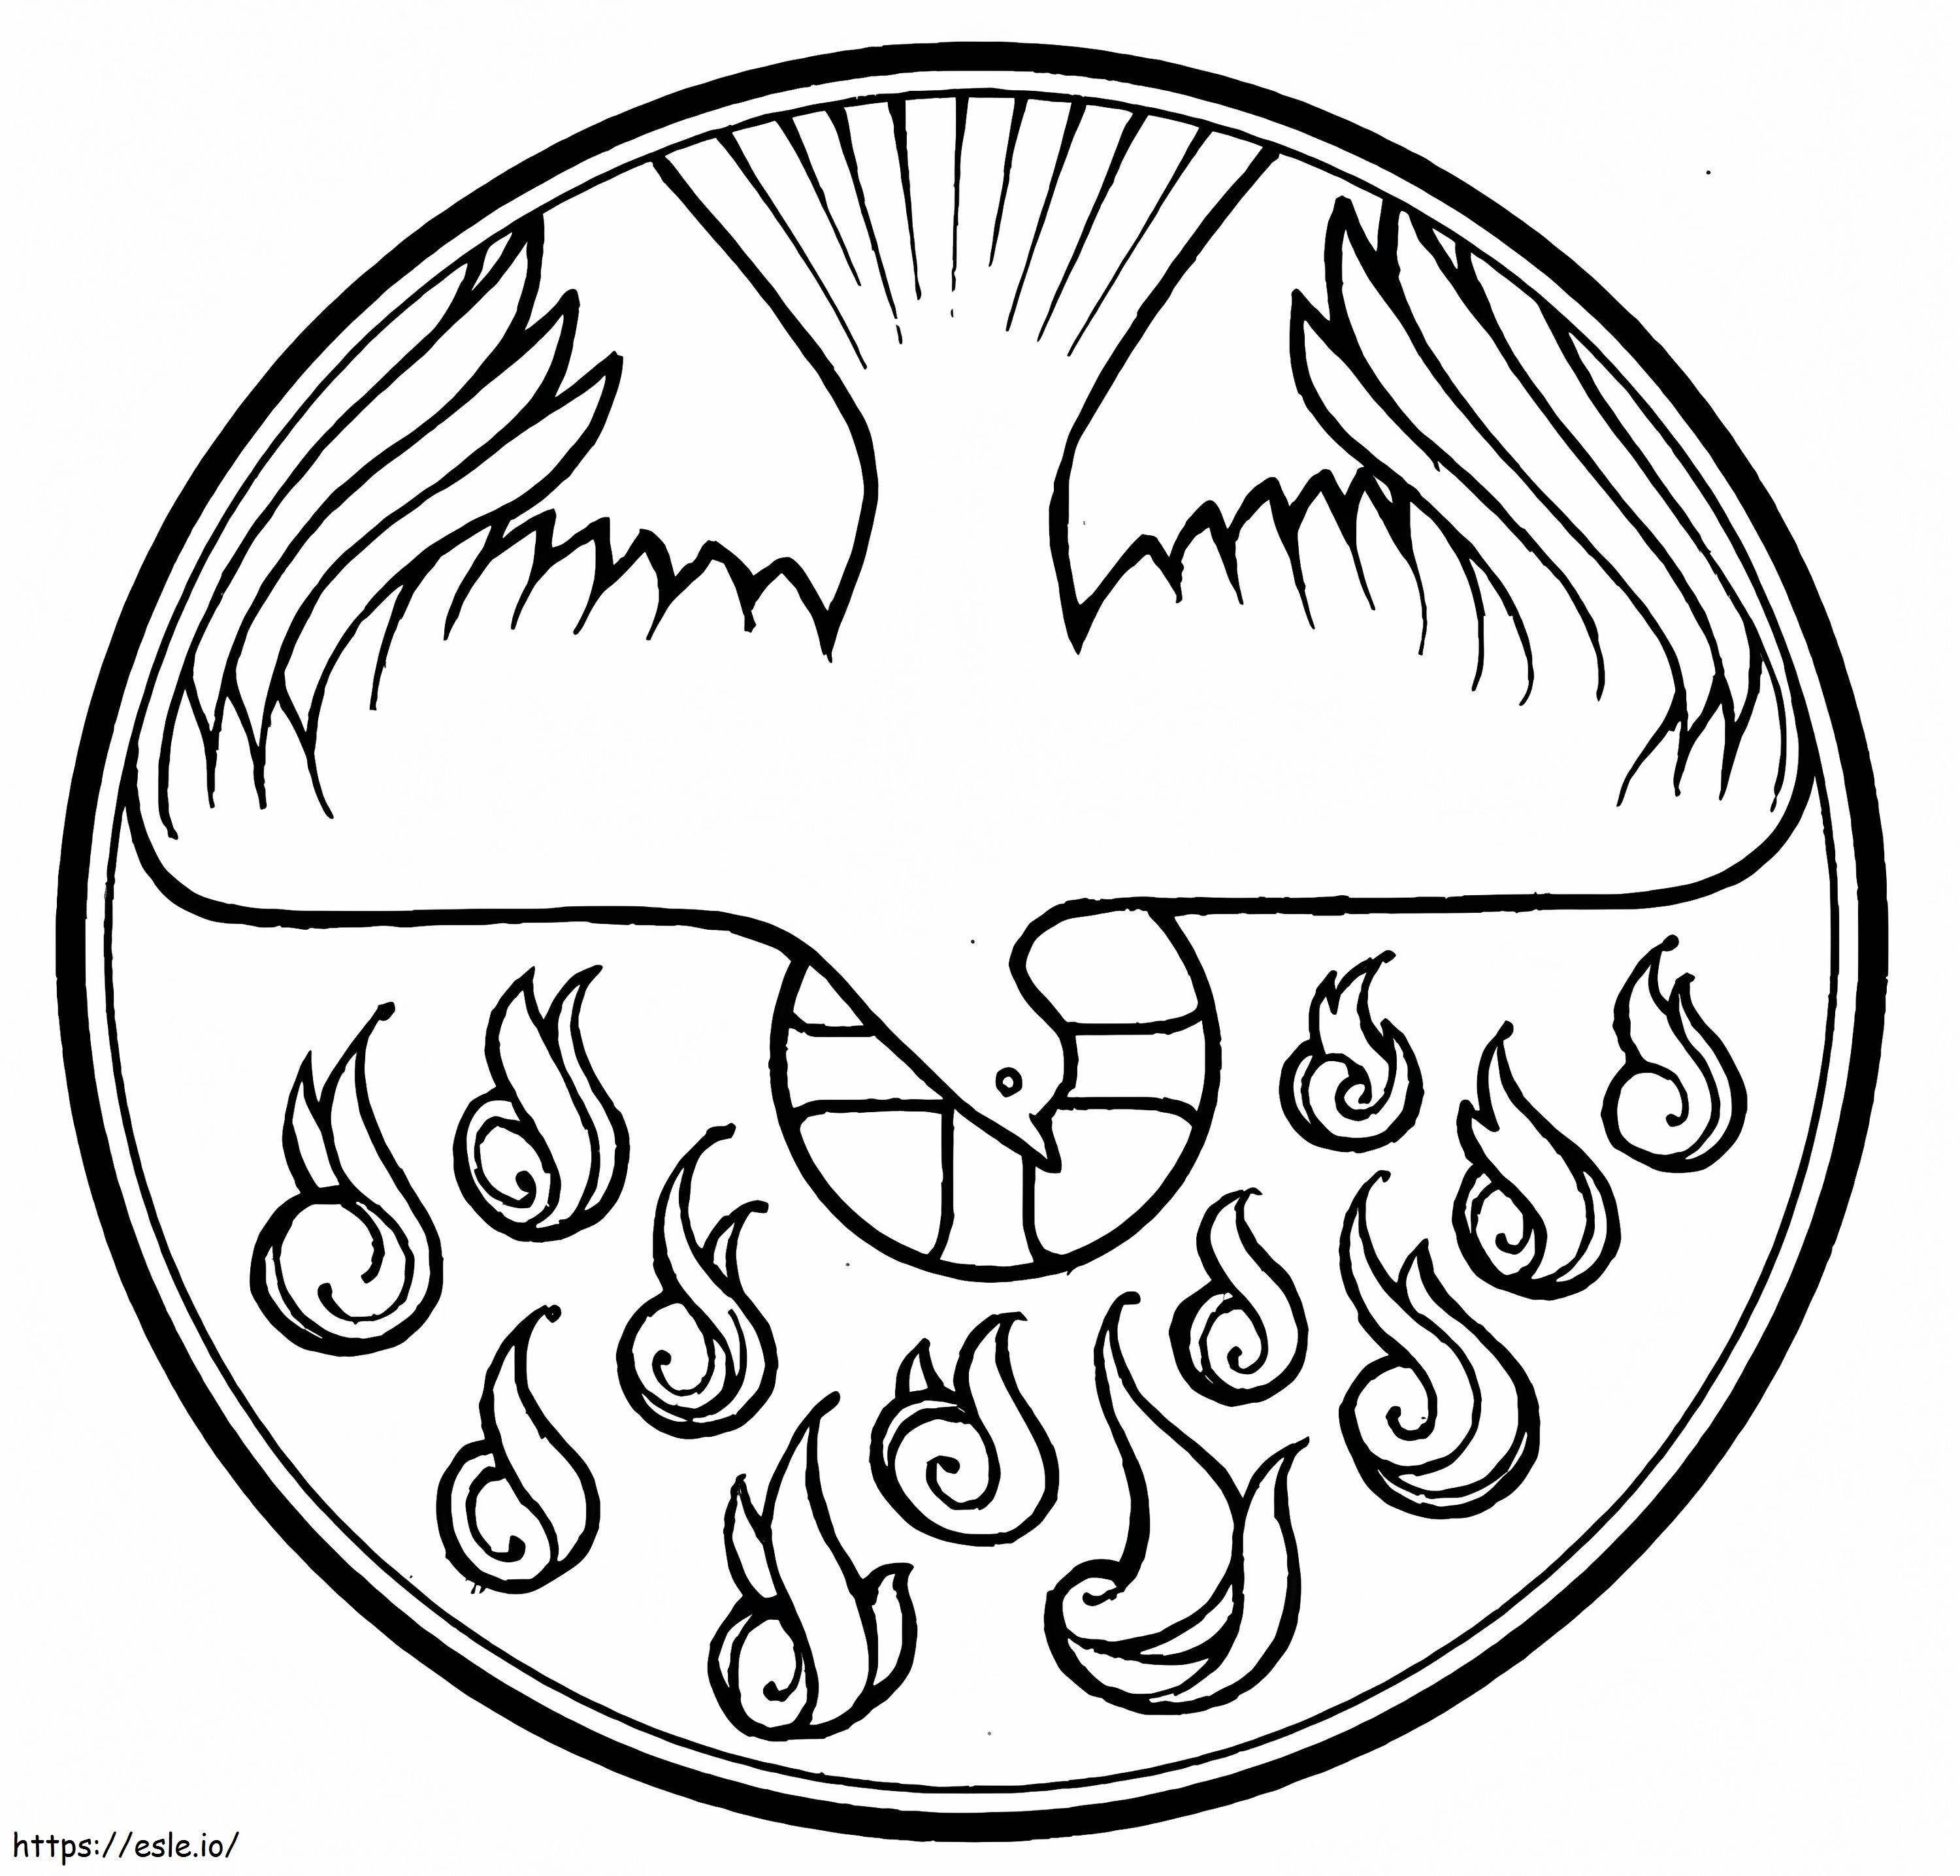 The Holy Spirit 2 coloring page